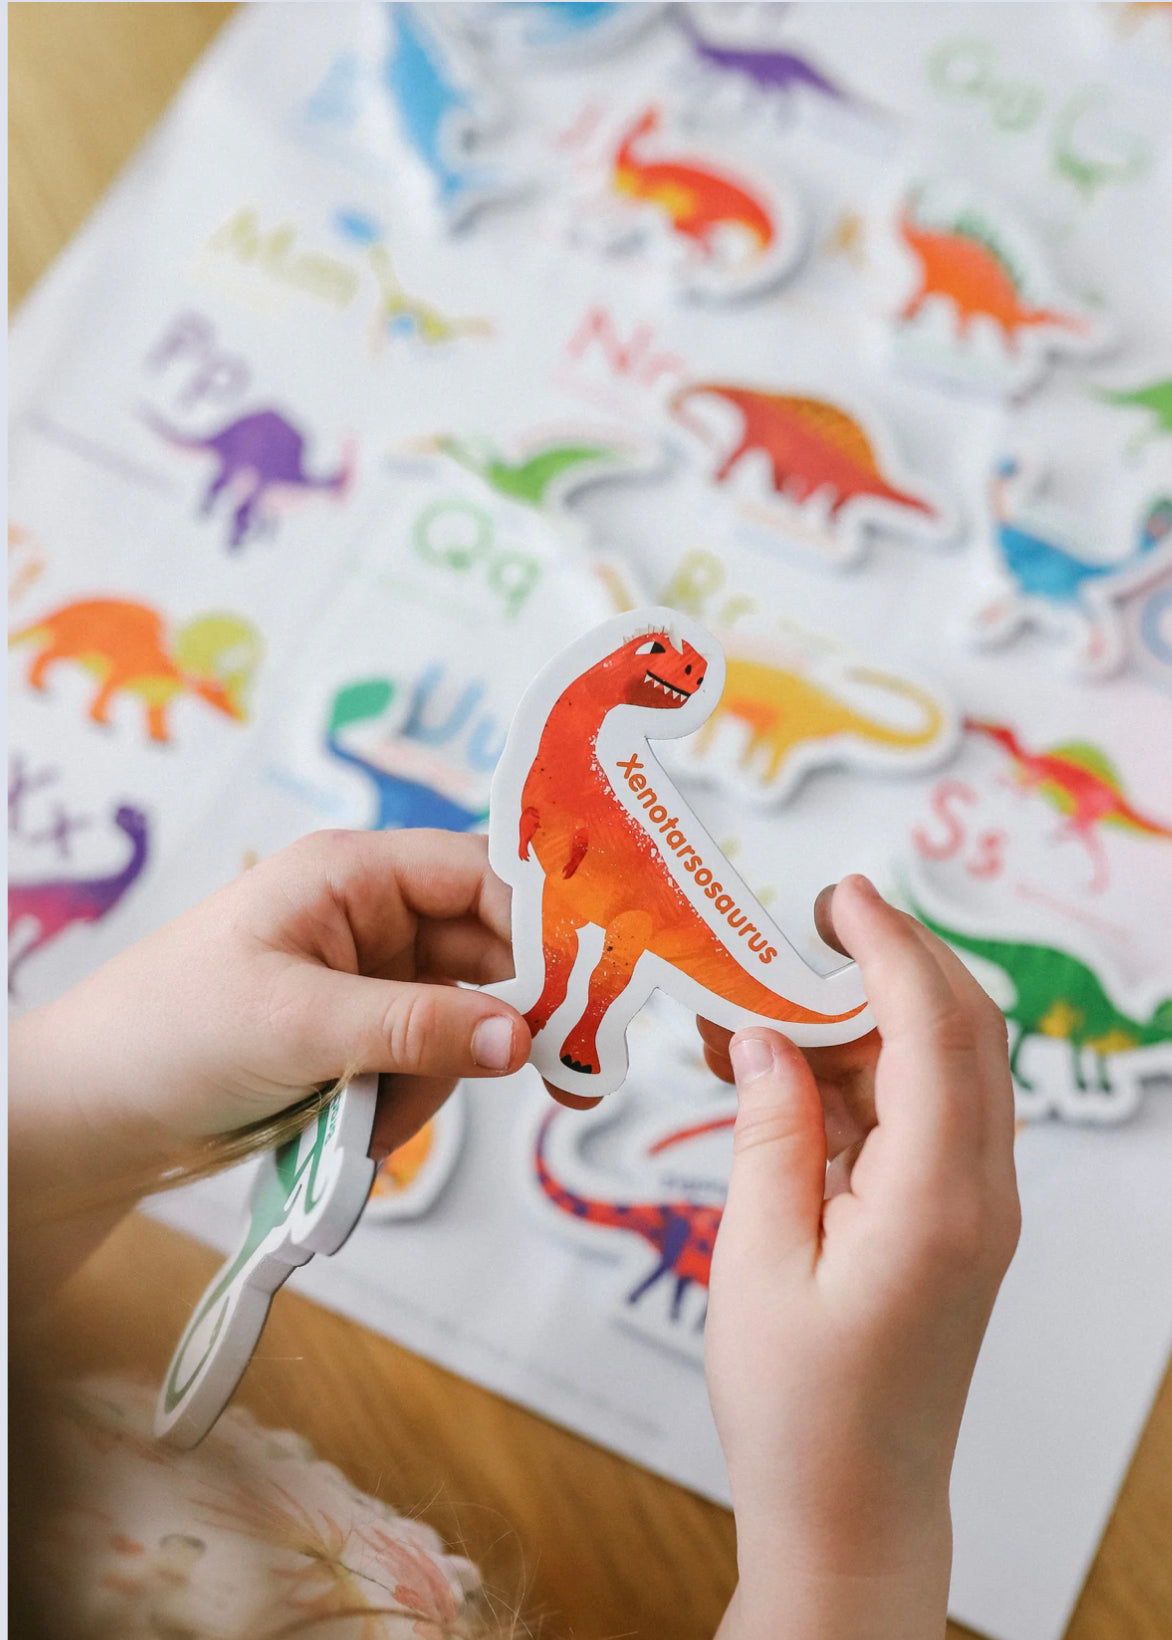 Curious Columbus - Magnetic Dinosaurs and Letters